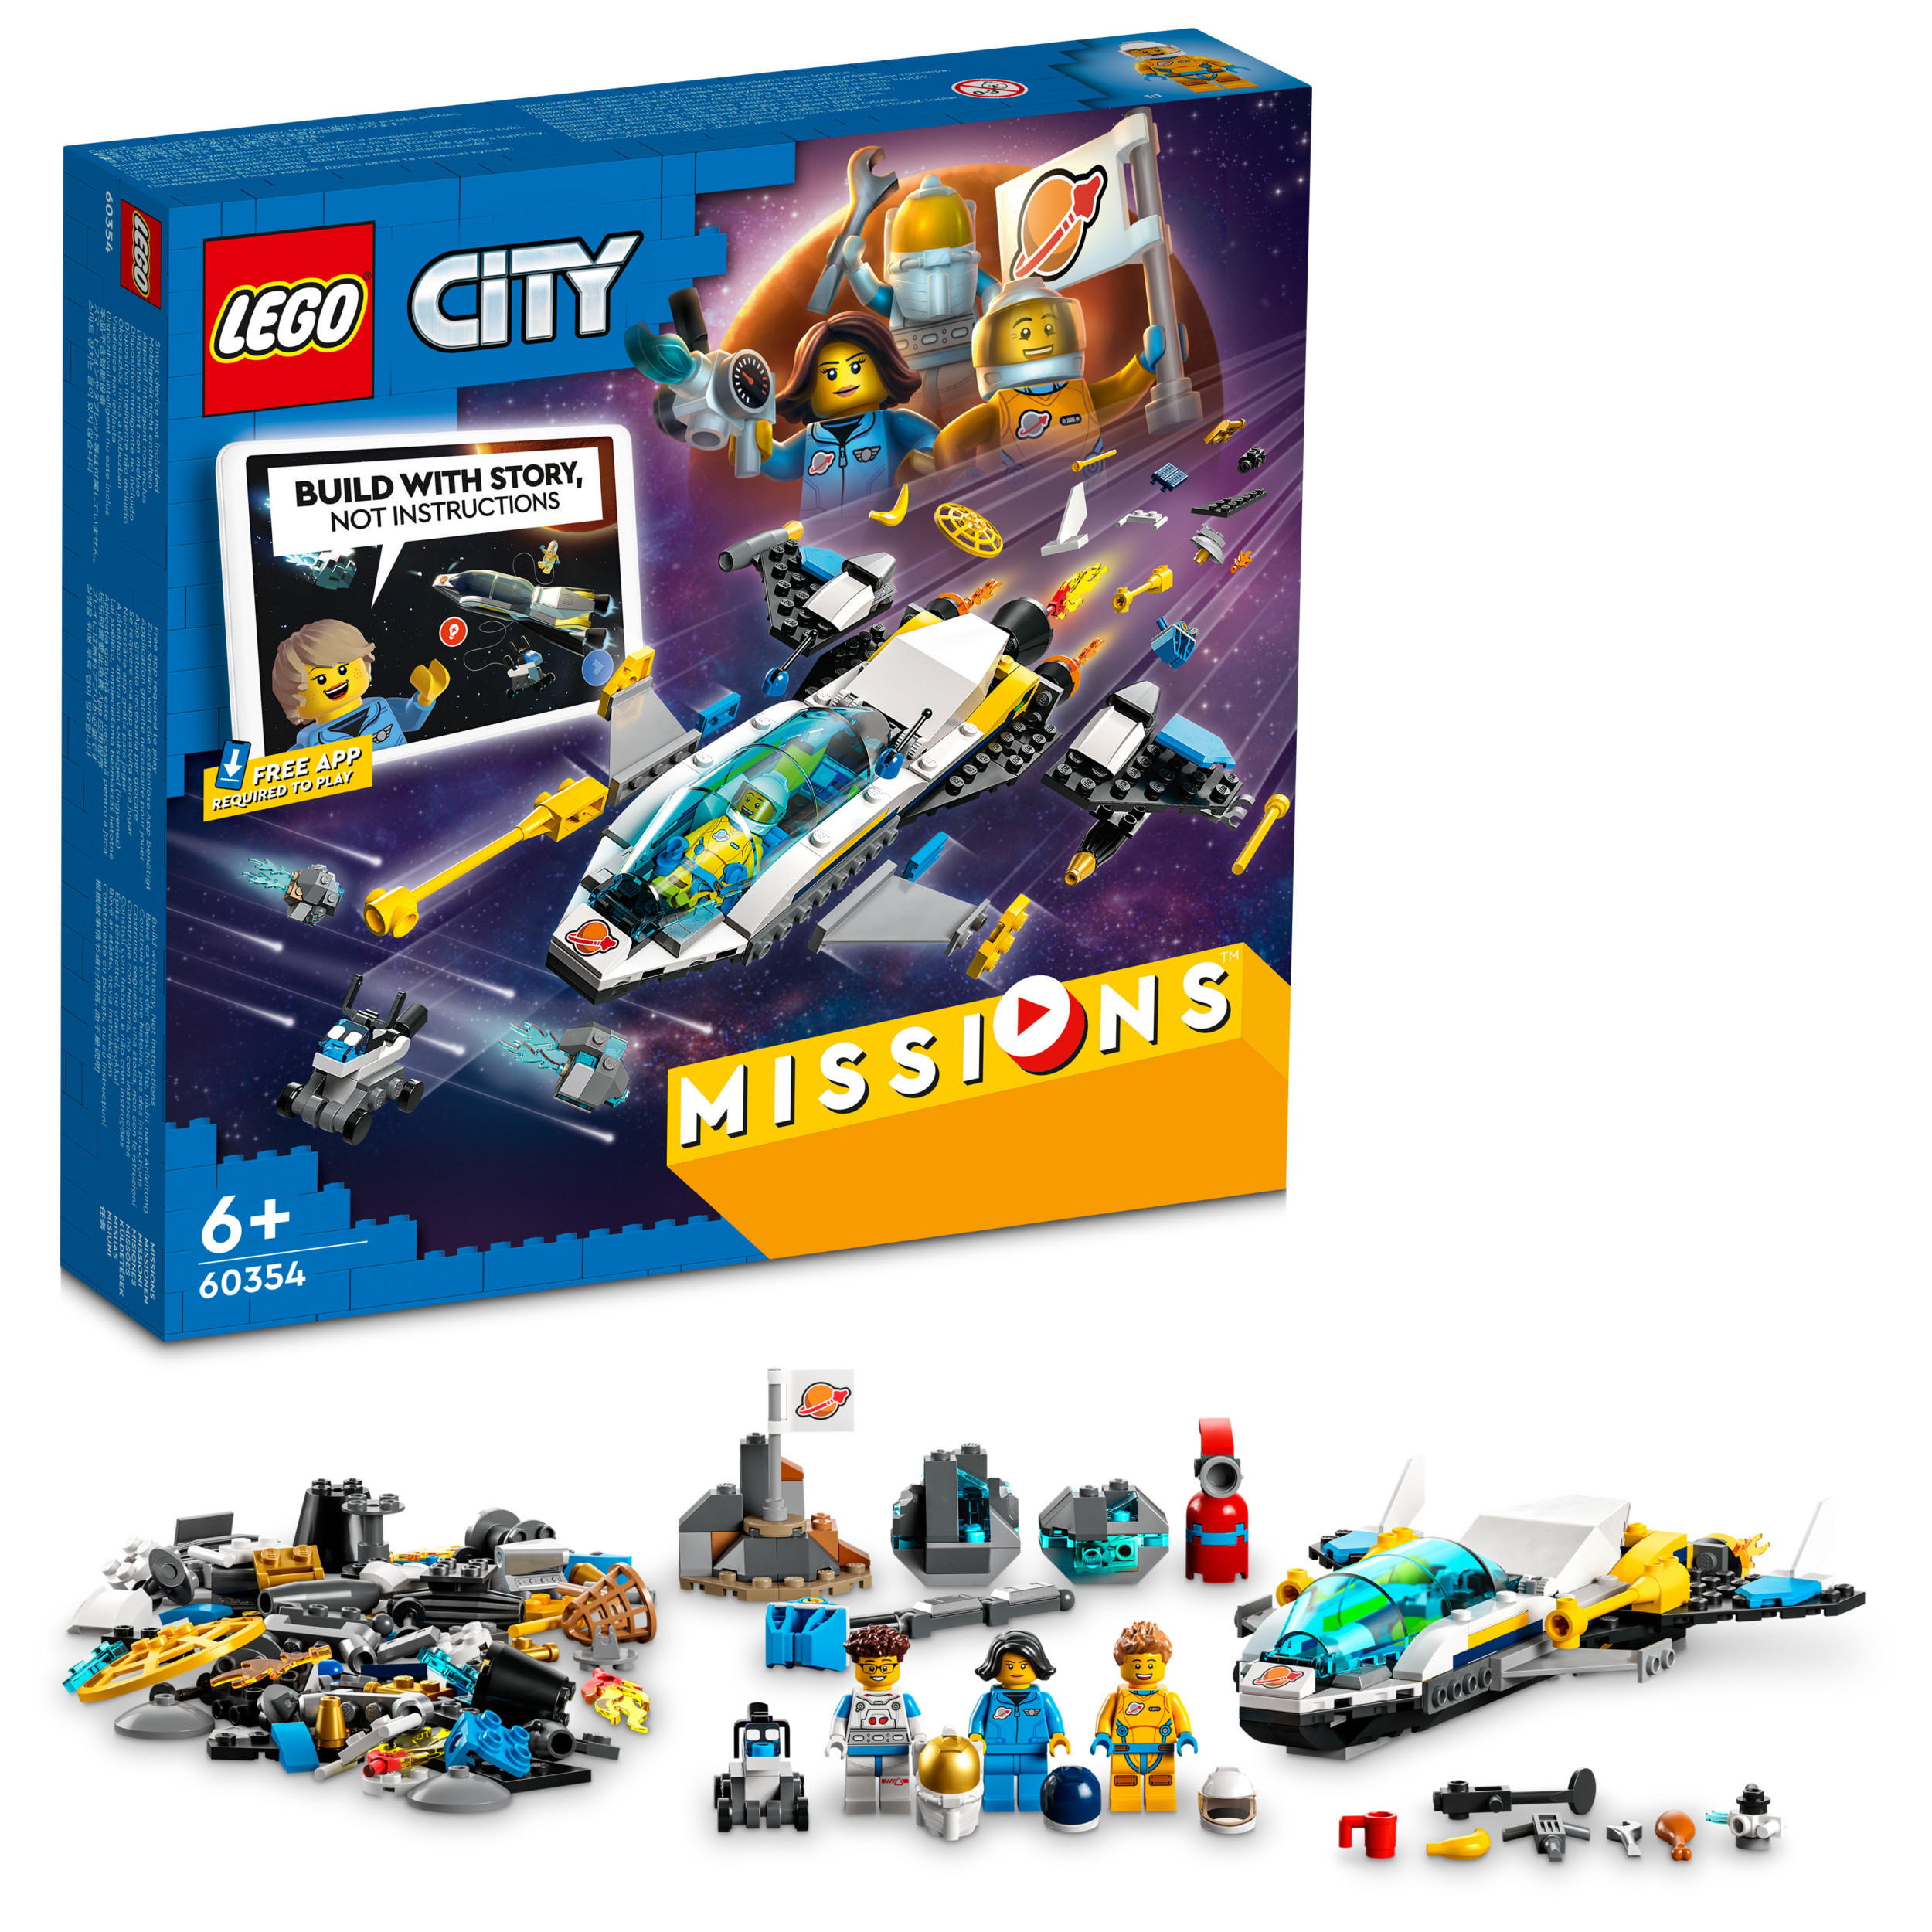 Umoderne Tilskynde Hjelm Lego City introduces new story-based building experienceToy World Magazine  | The business magazine with a passion for toys